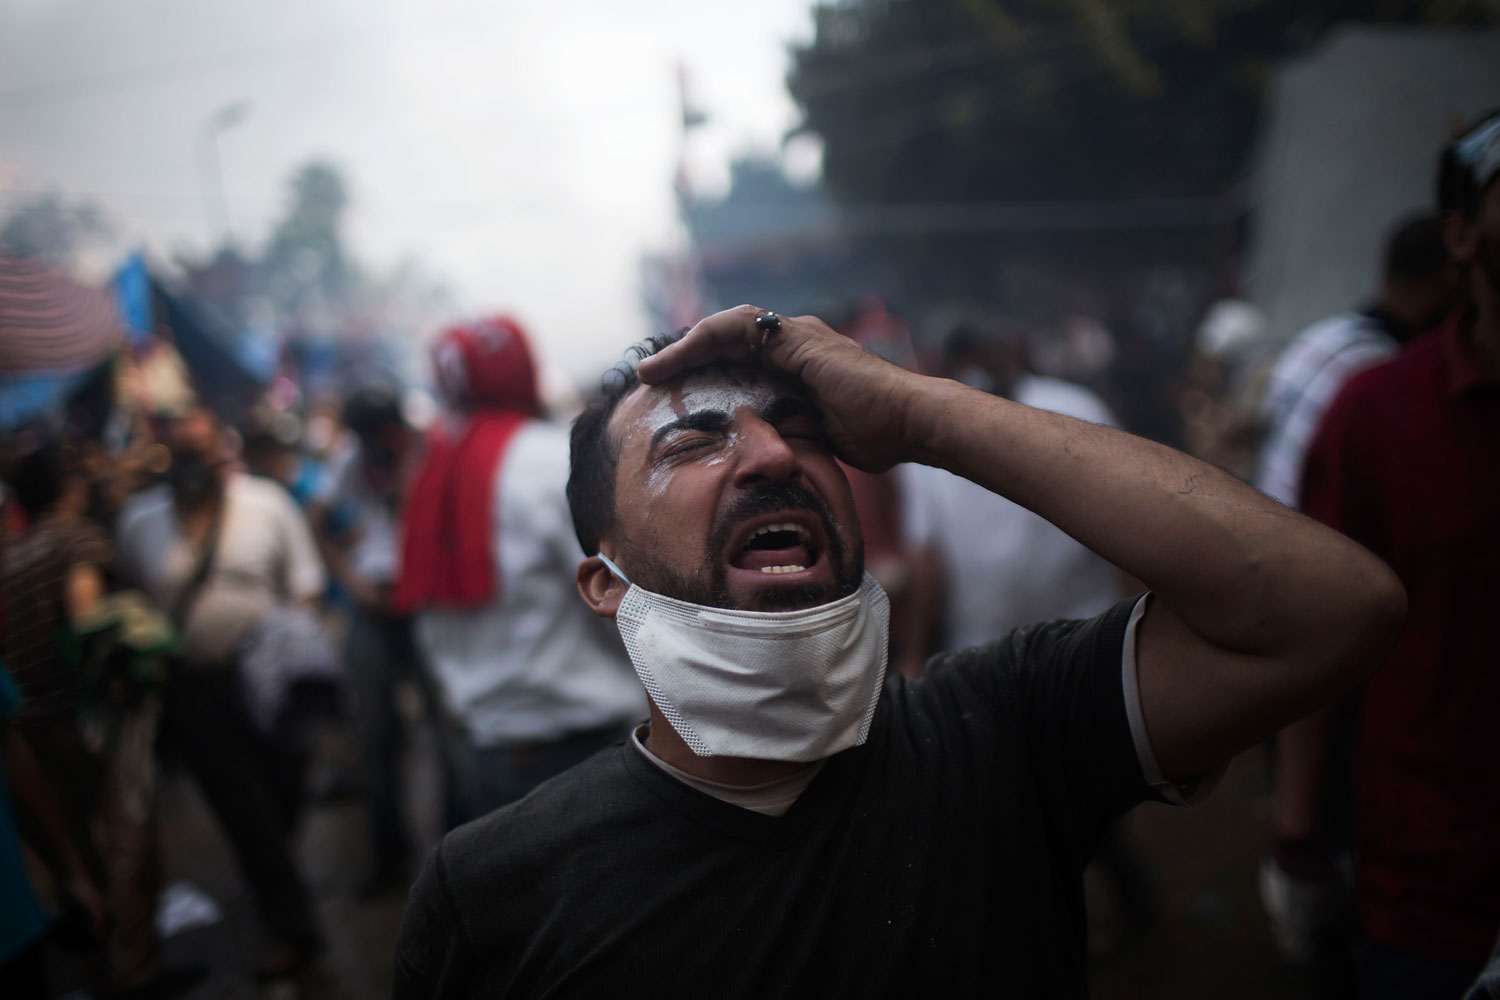 A supporter of ousted Egyptian President Mohammed Morsi reacts during clashes with Egyptian security forces in Rabaah Al-Adawiya in Cairo's Nasr City district, Aug. 14, 2013.